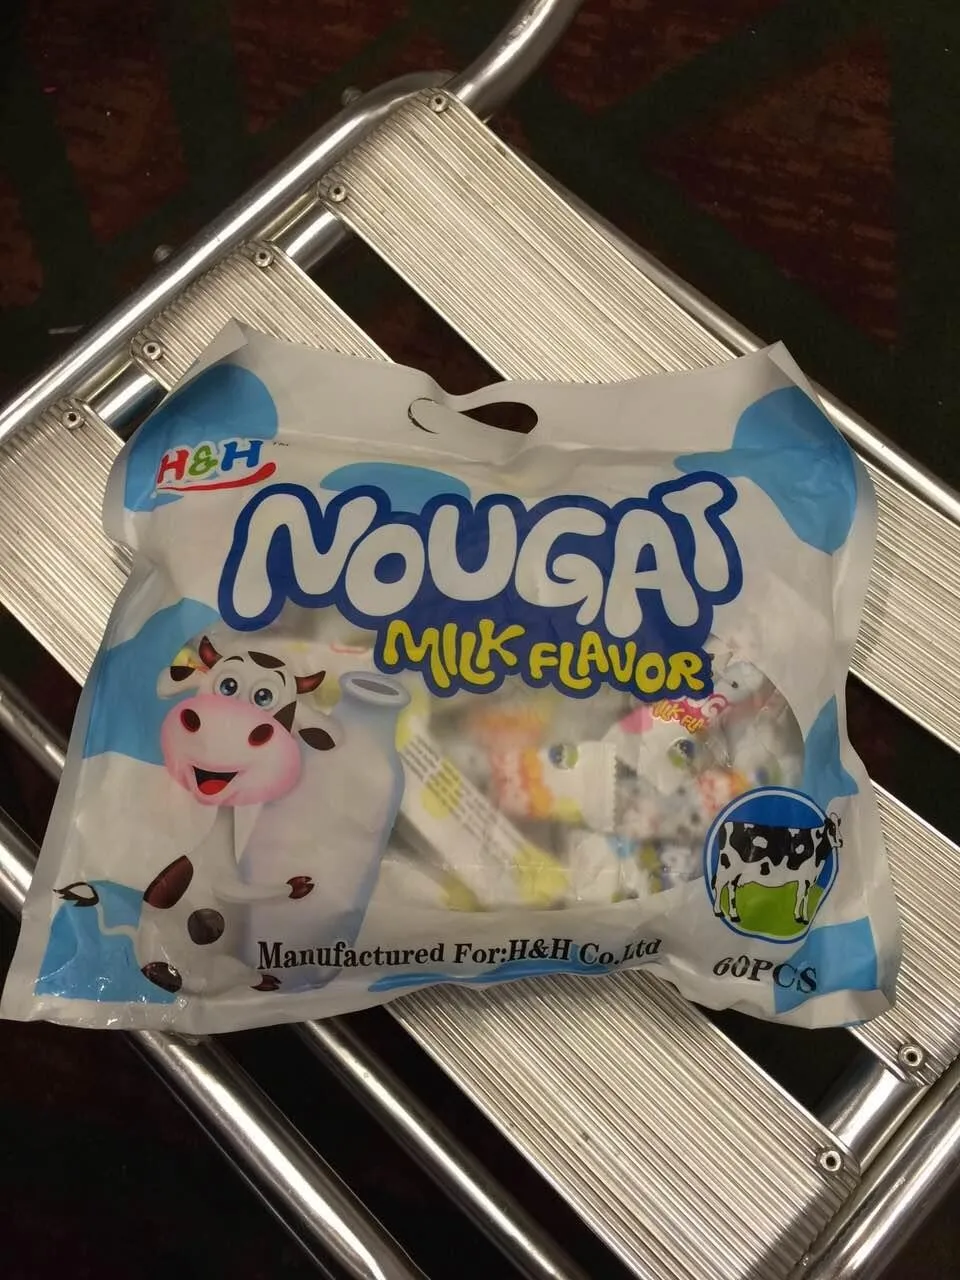 Delicious Nougat Candy Supplier Buy Nougat Candy Nougat Milk Candy Sweet Candy Product On Alibaba Com